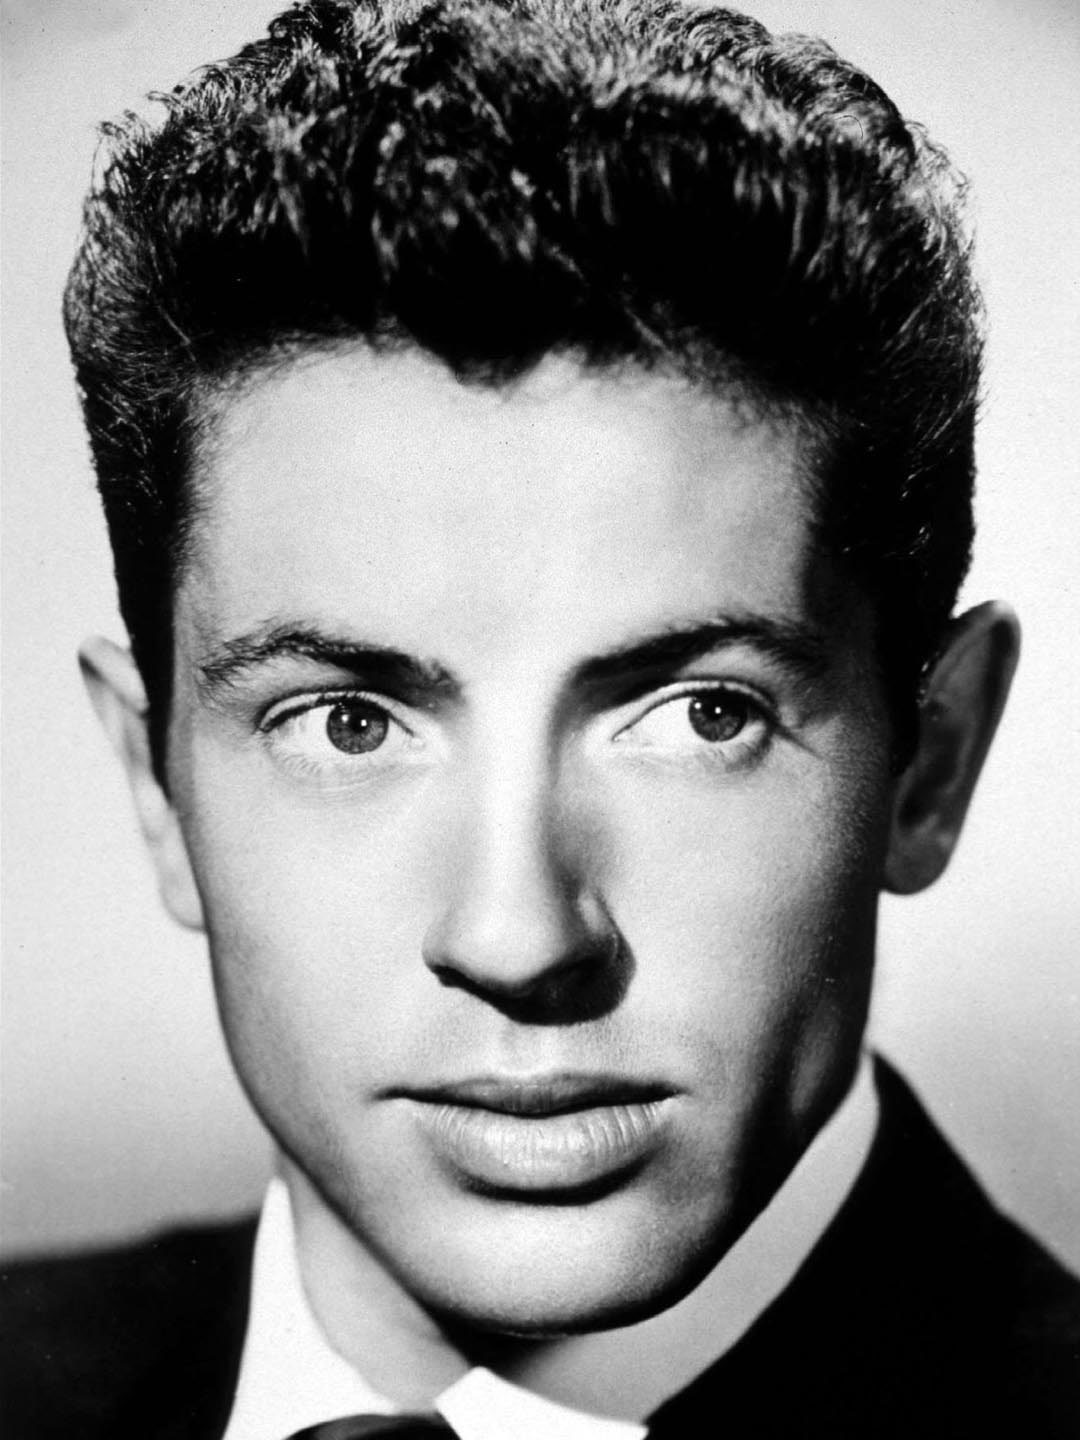 How tall is Farley Granger?